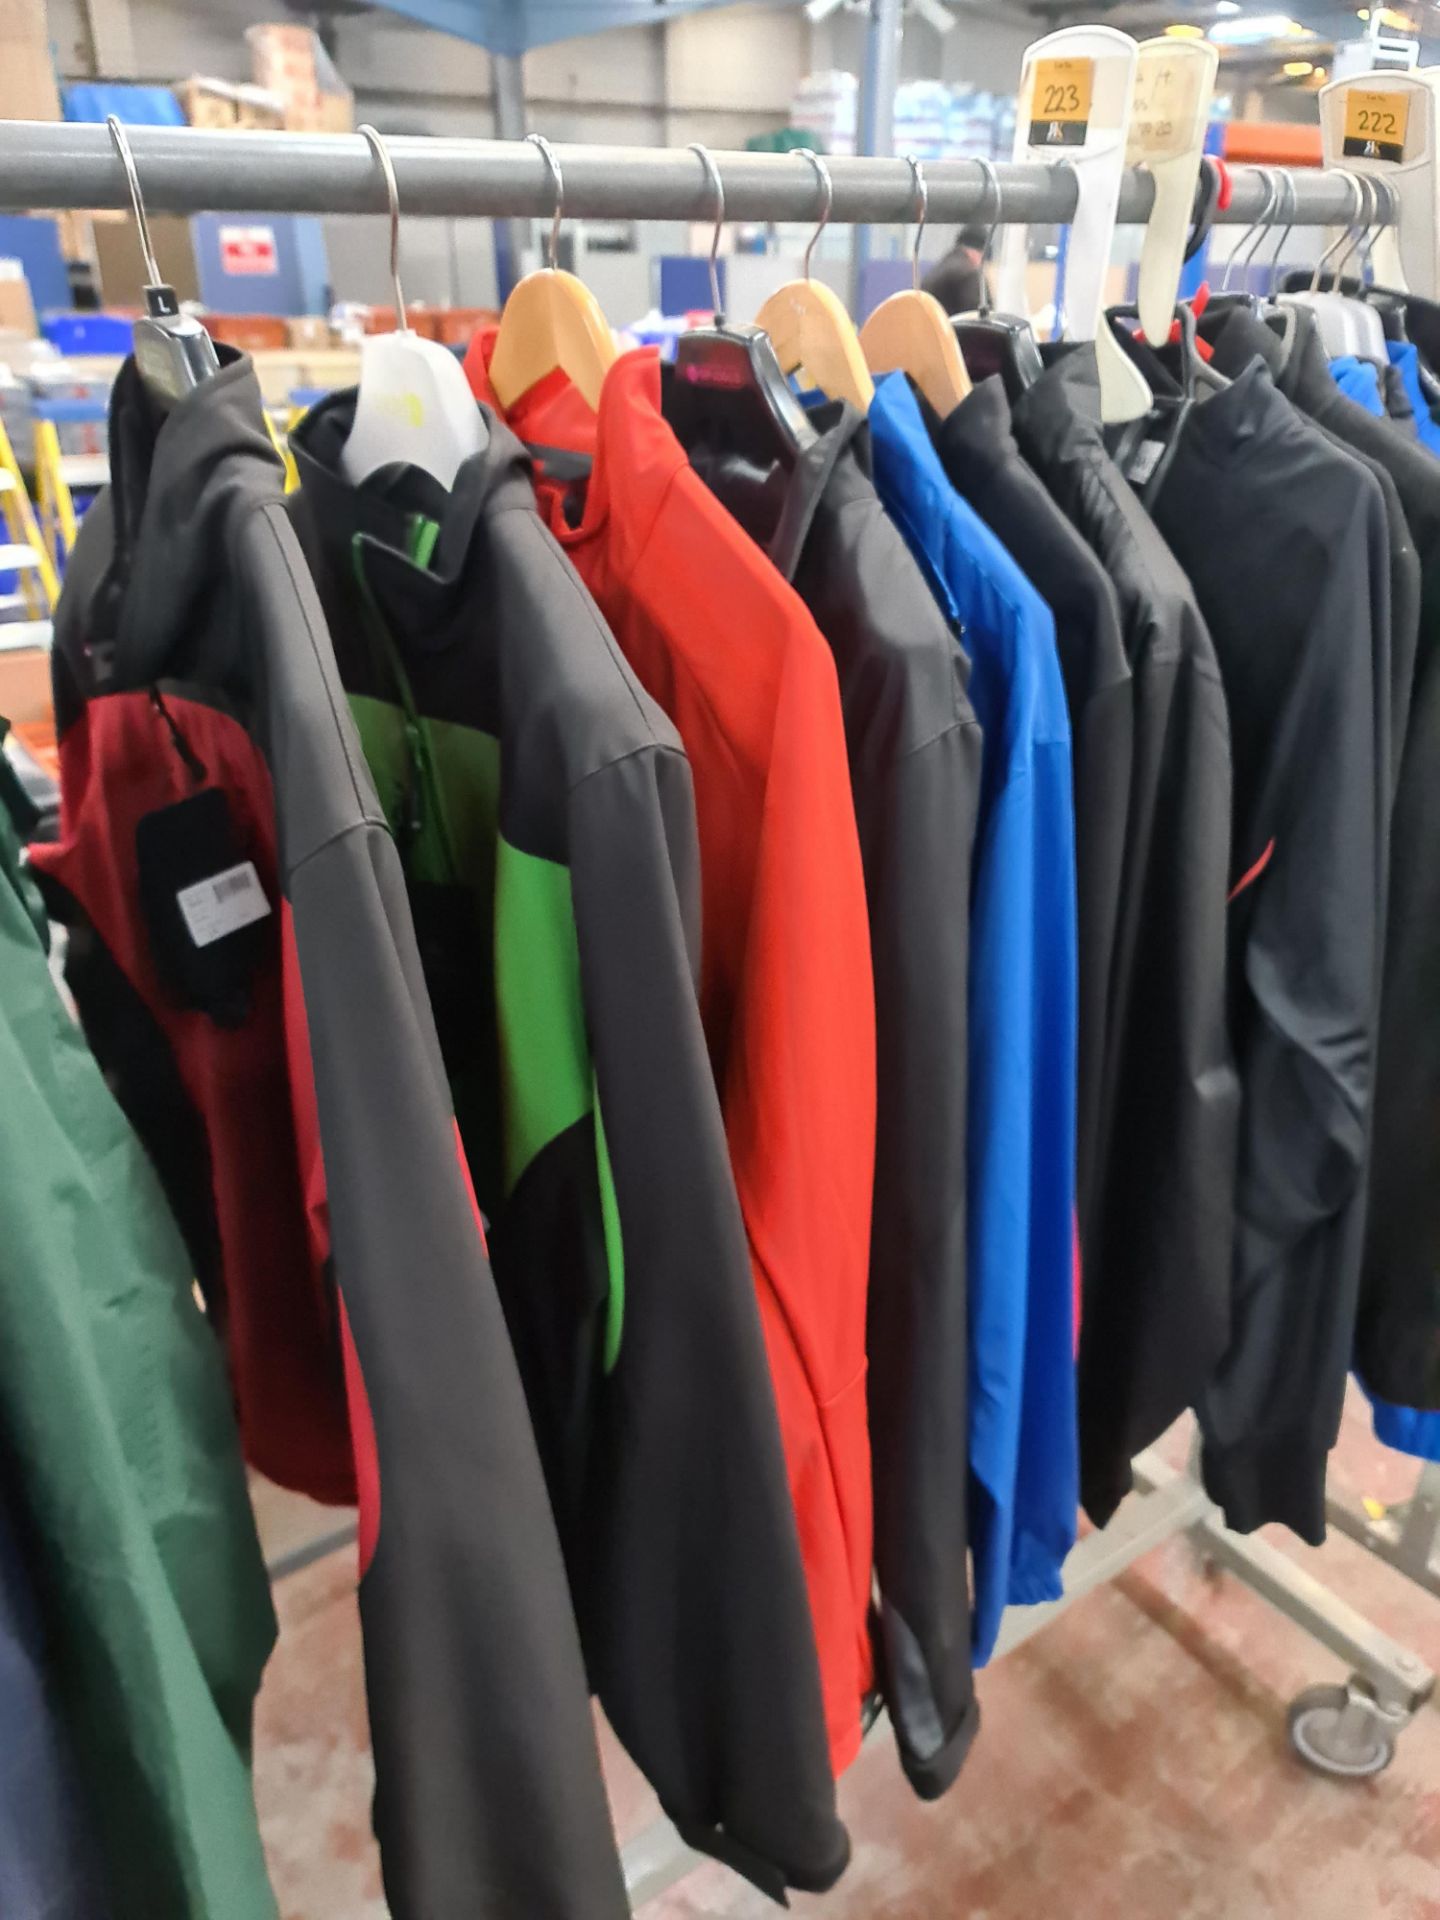 7 off assorted Stormtech soft shell jackets and similar. N.B. hangers and garment rails excluded